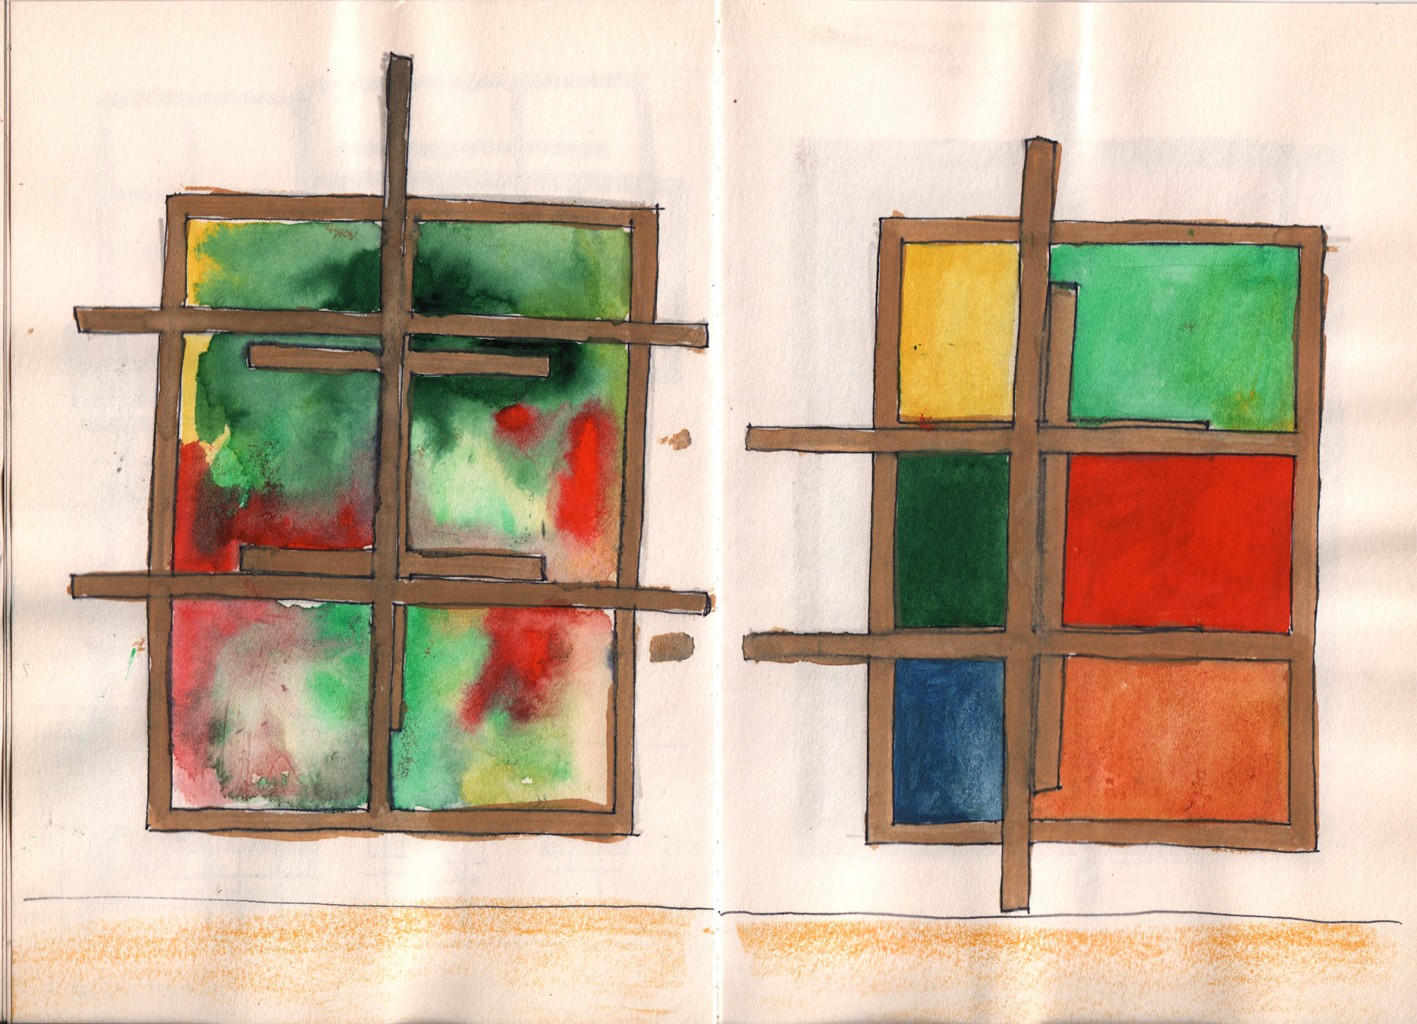 First sketches for 'Metro Station', 1996  21,4 x 14,7 cm.